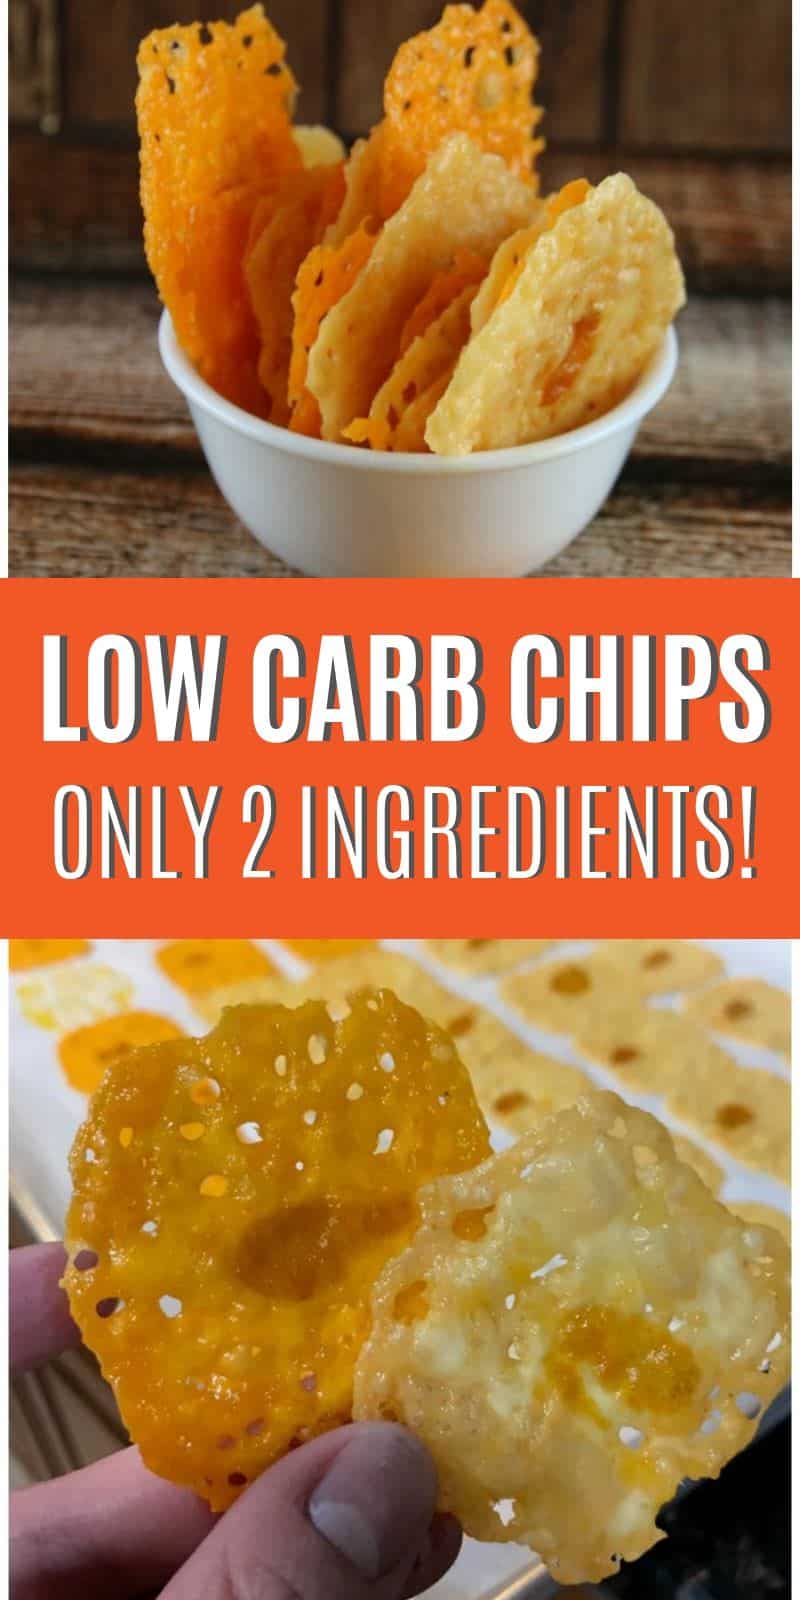 These lazy low carb chips taste amazing and you only need 2 ingredients to make them! Try them today...you won't regret it!